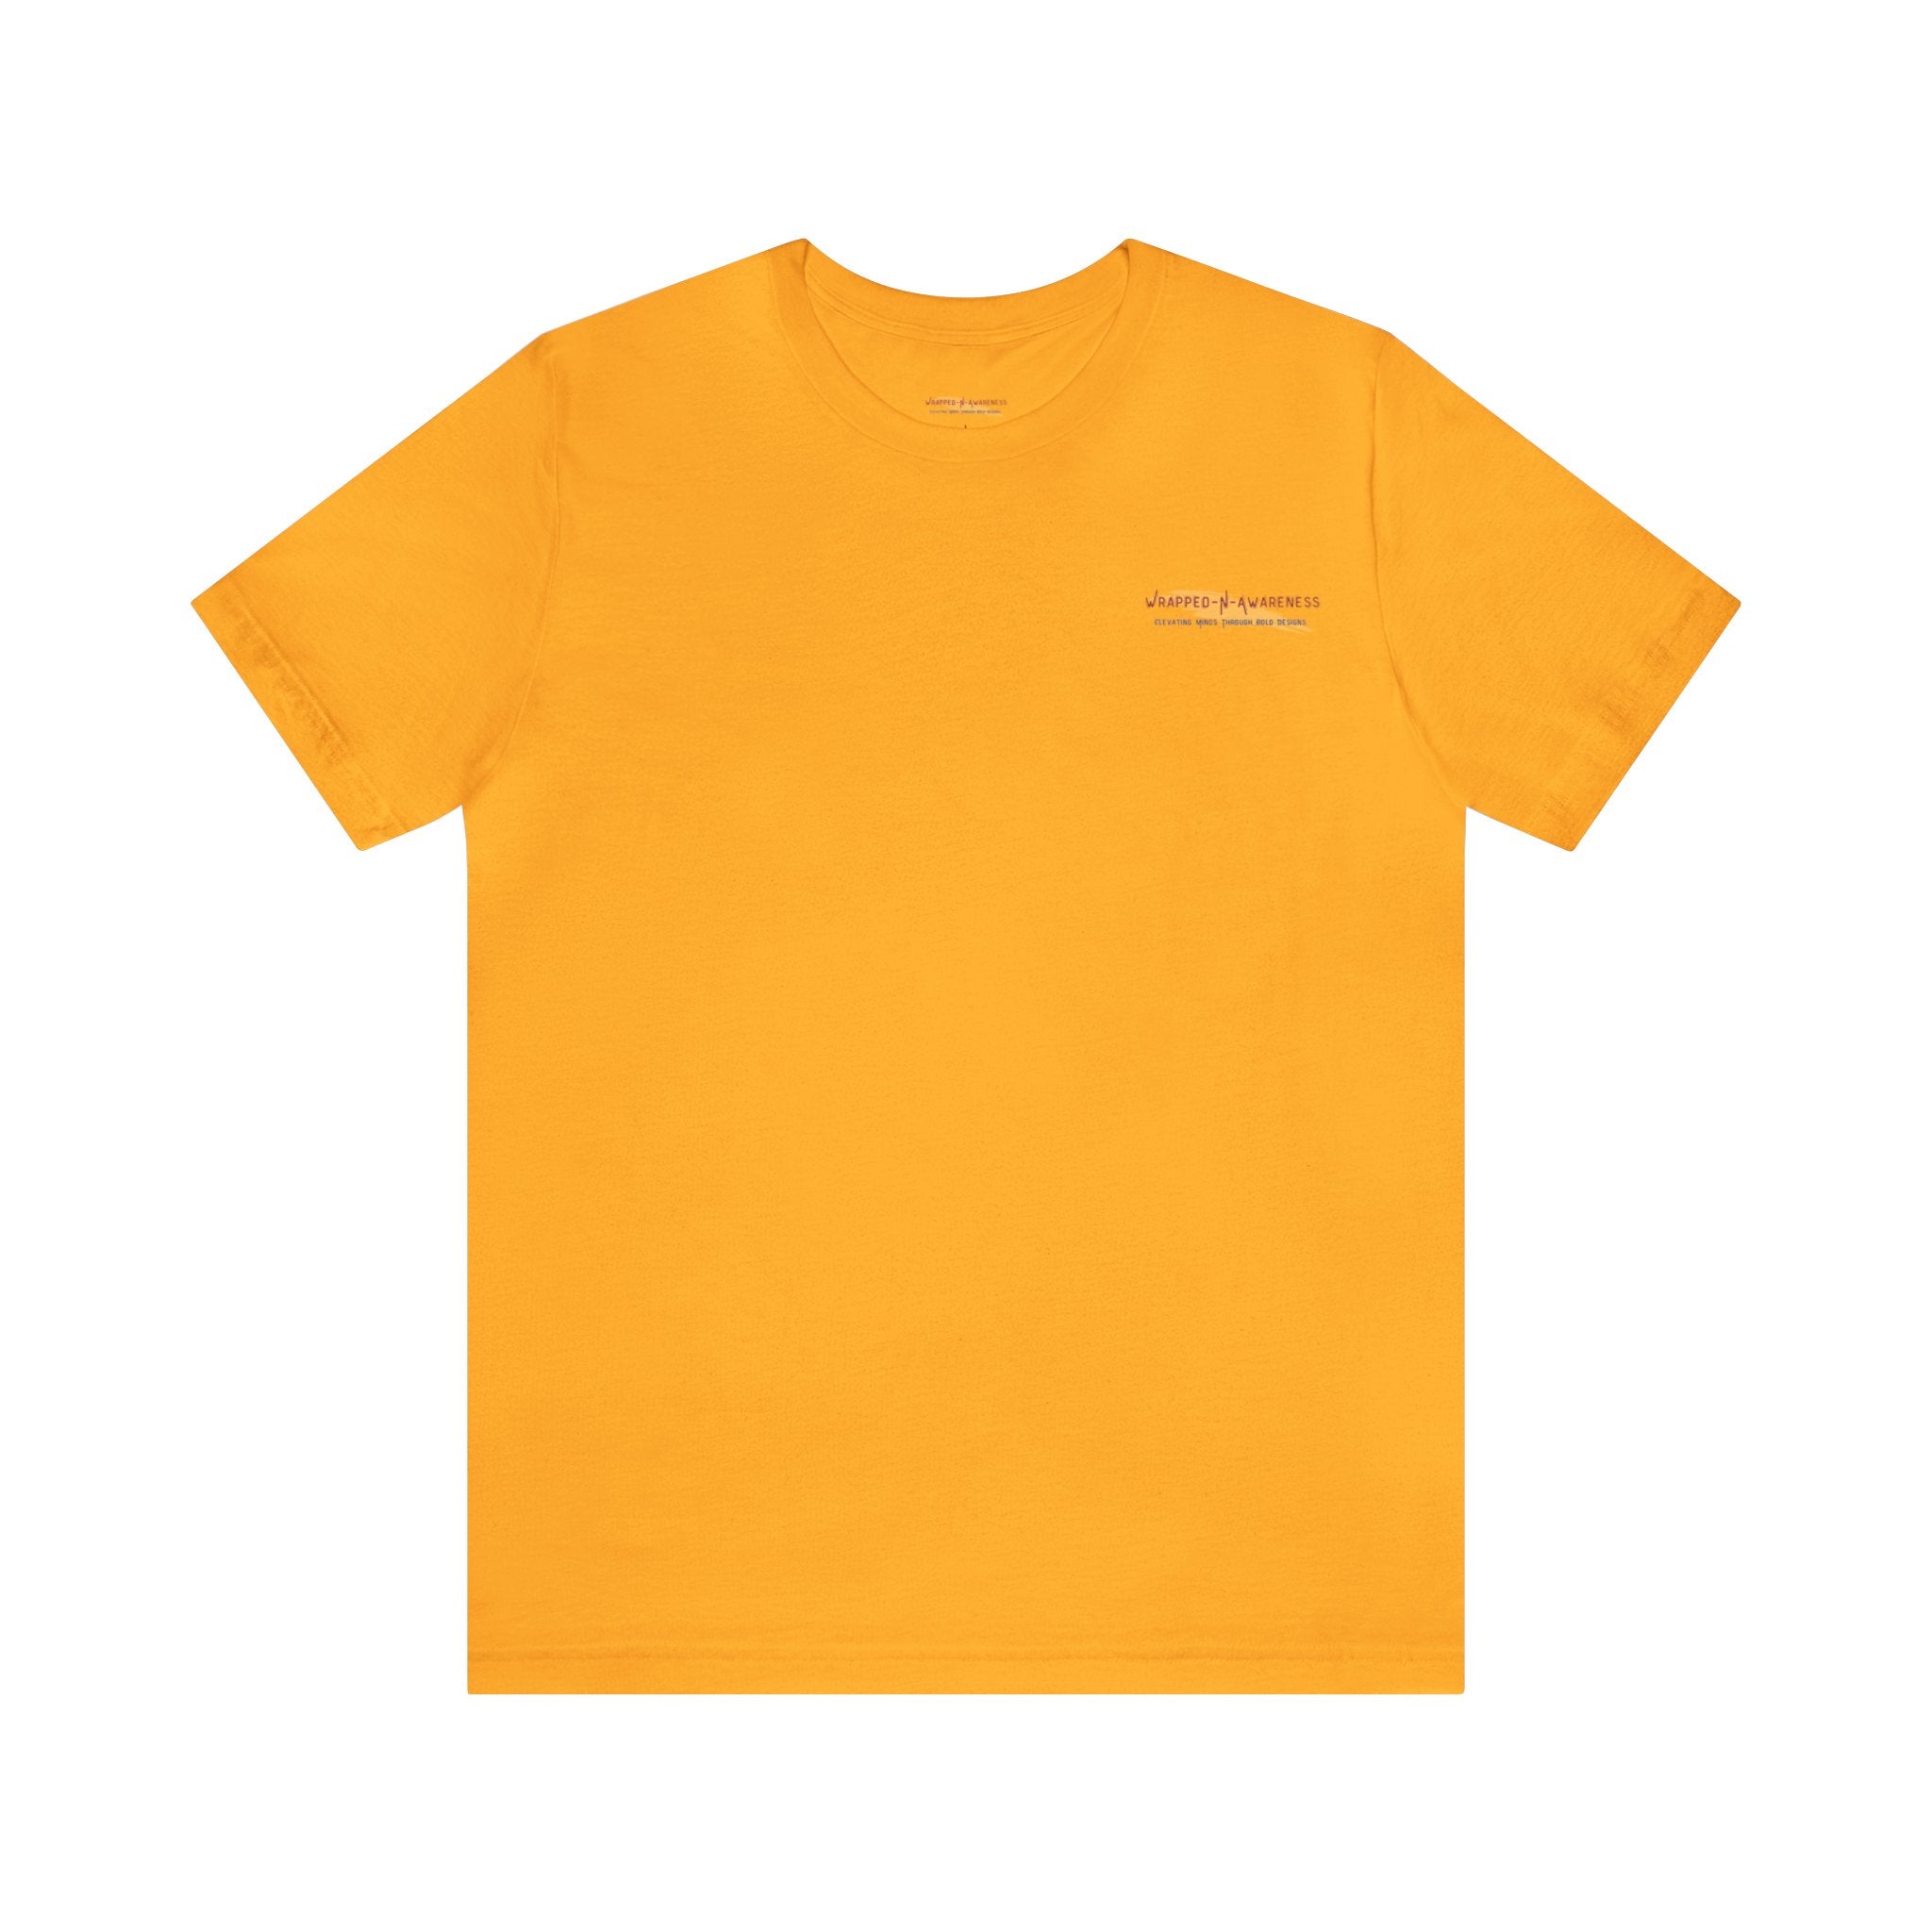 Progress Over Perfection Tee - Bella+Canvas 3001 Gold Airlume Cotton Bella+Canvas 3001 Crew Neckline Jersey Short Sleeve Lightweight Fabric Mental Health Support Retail Fit Tear-away Label Tee Unisex Tee T-Shirt 2560635387718922362_2048 Printify